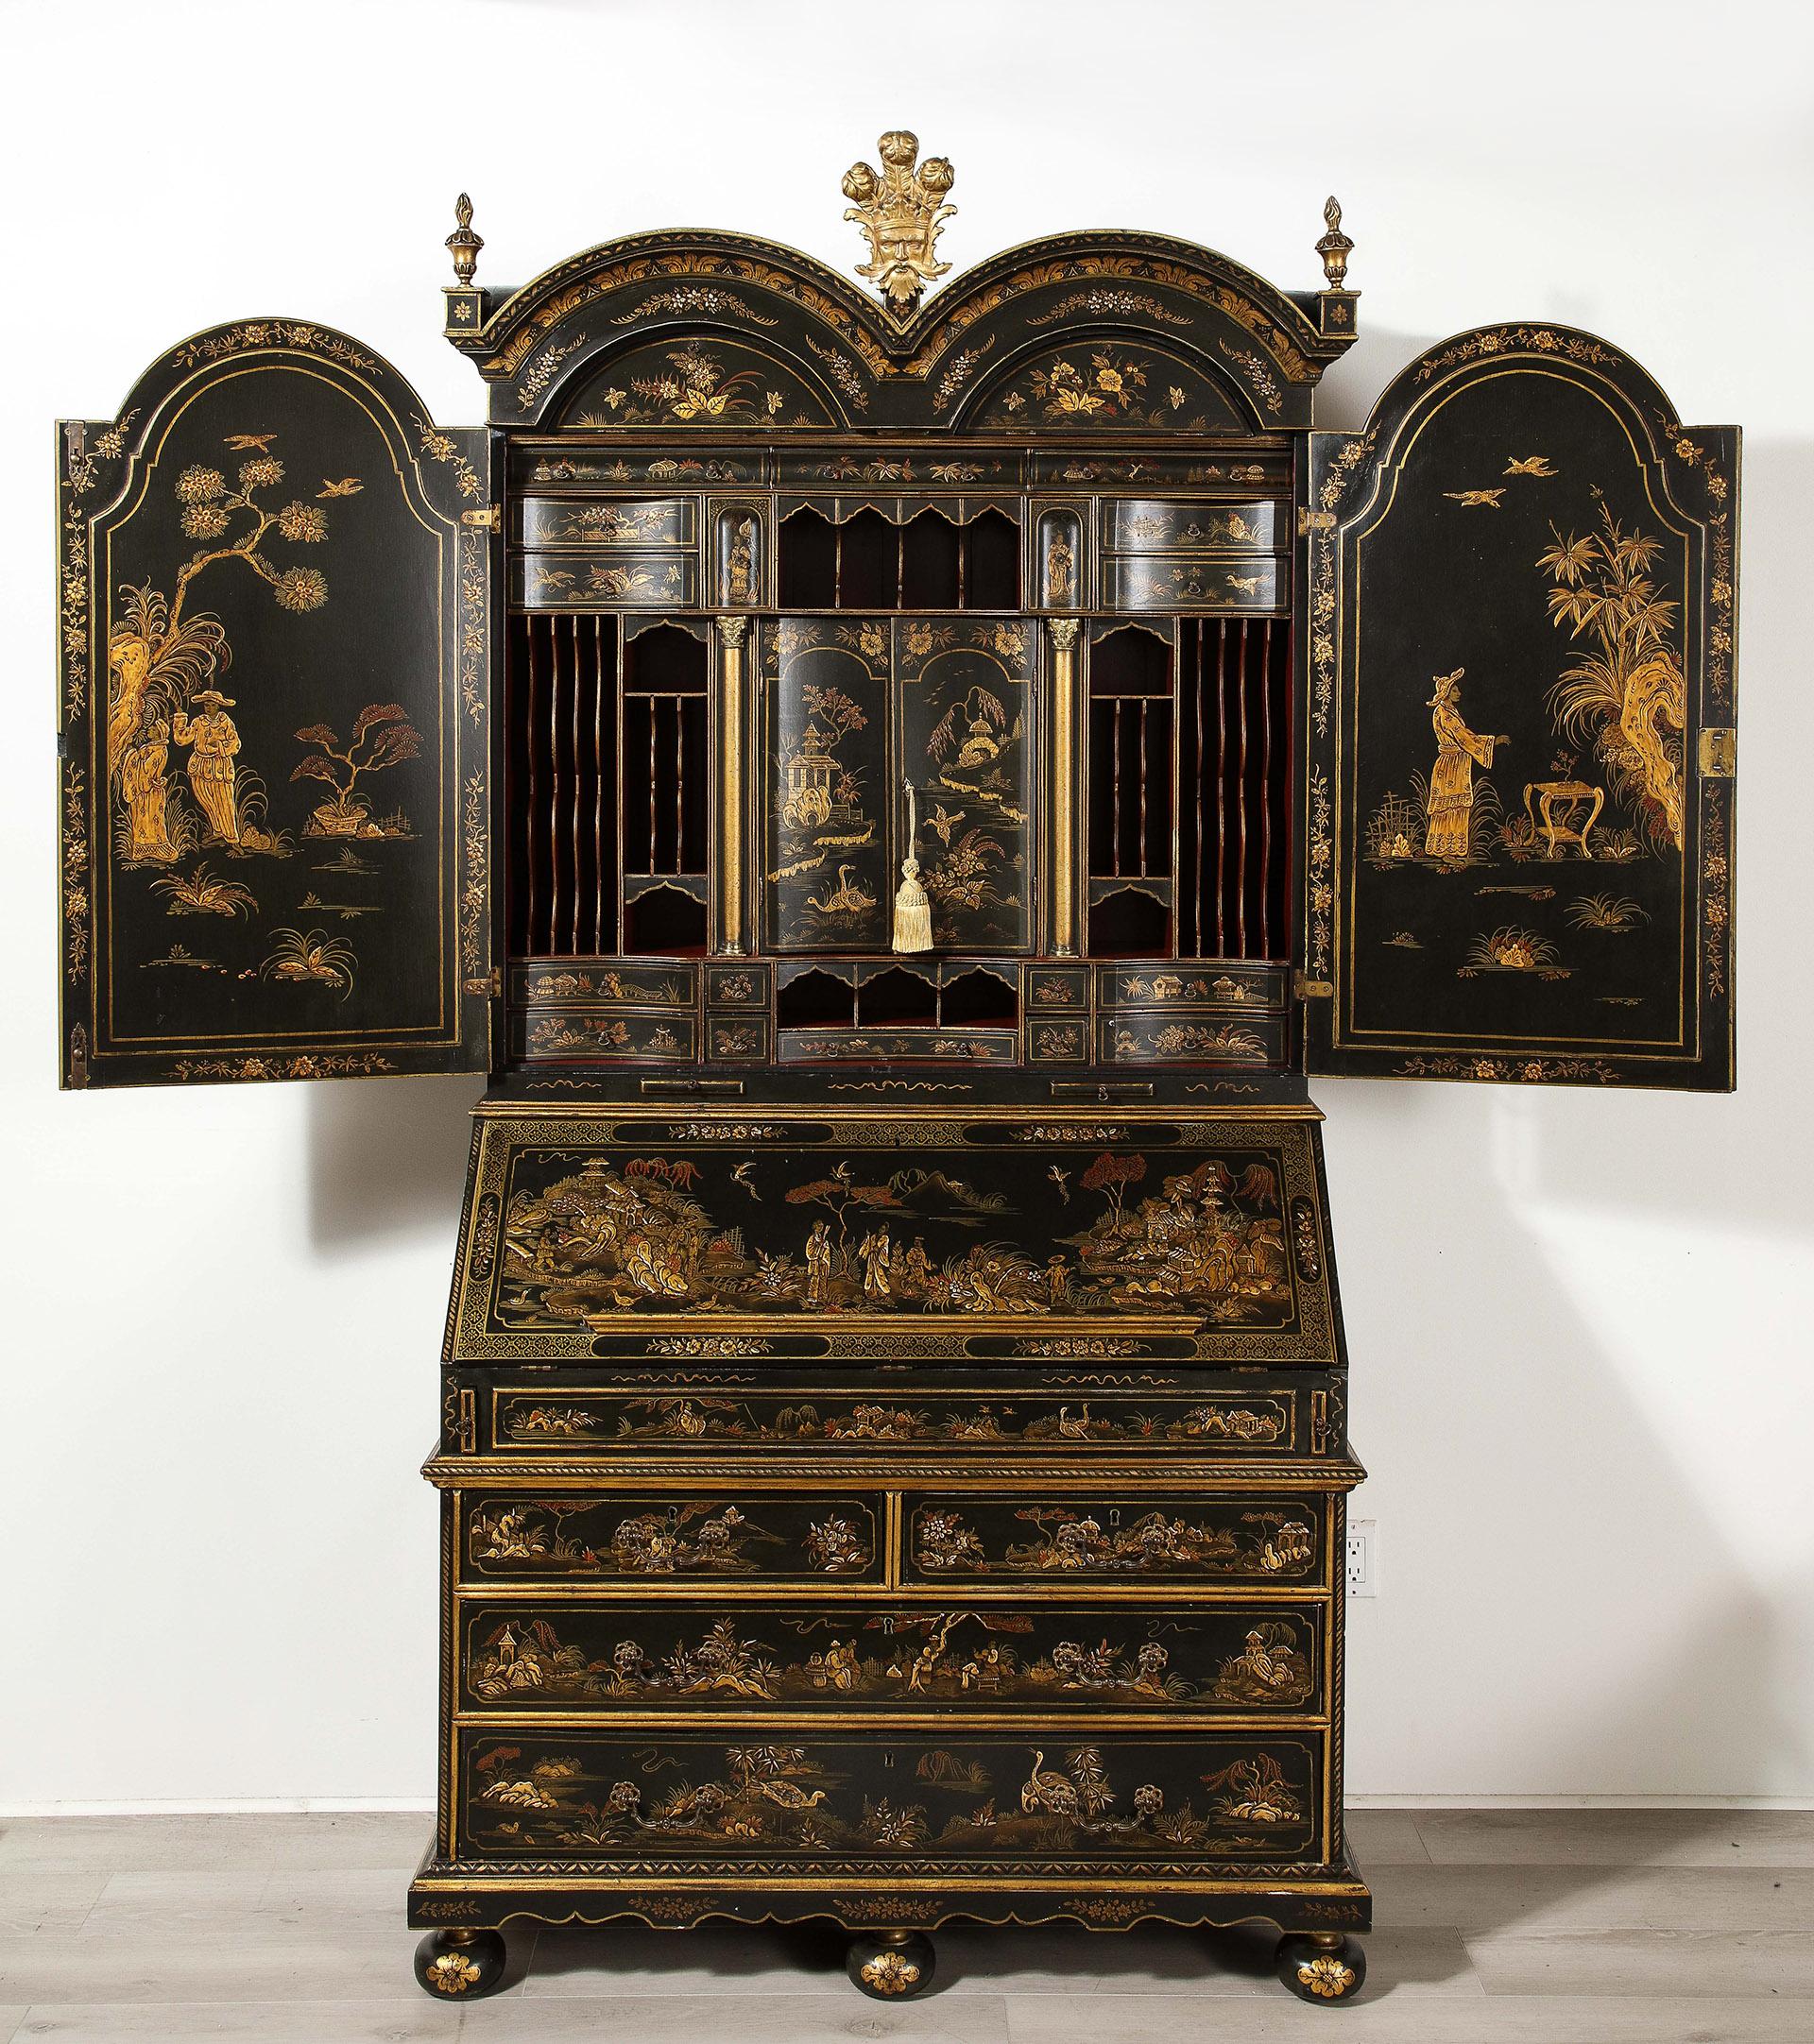 British A Spectacular English Chinoiserie Secretary For Sale